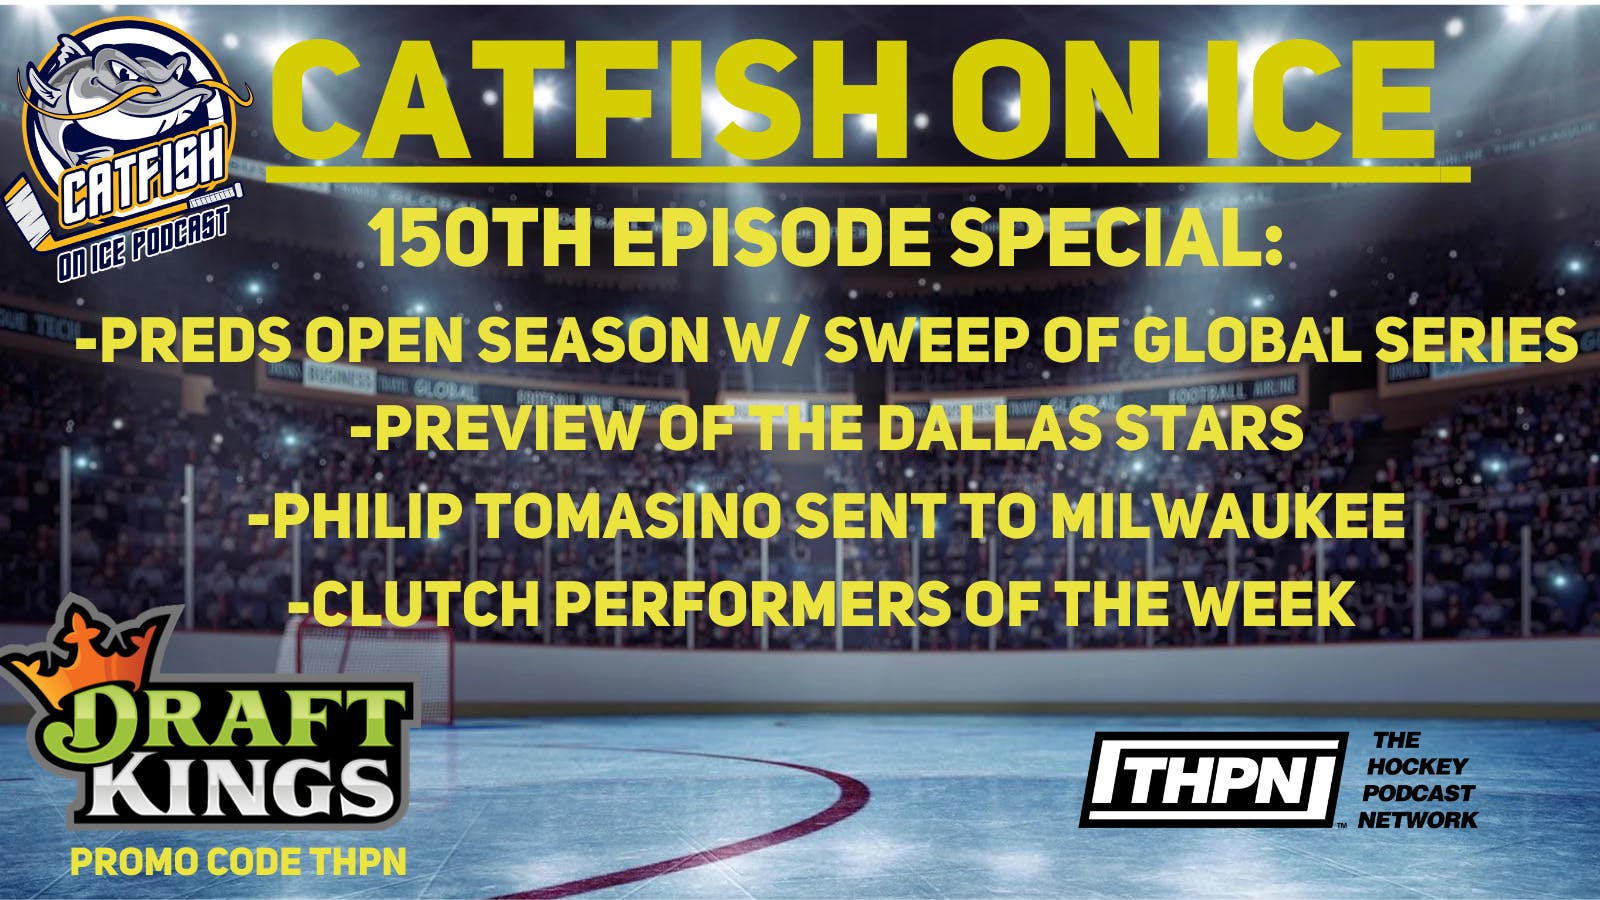 CATFISH ON ICE 150TH EPISODE SPECIAL: PREDS SWEEP GLOBAL SERIES